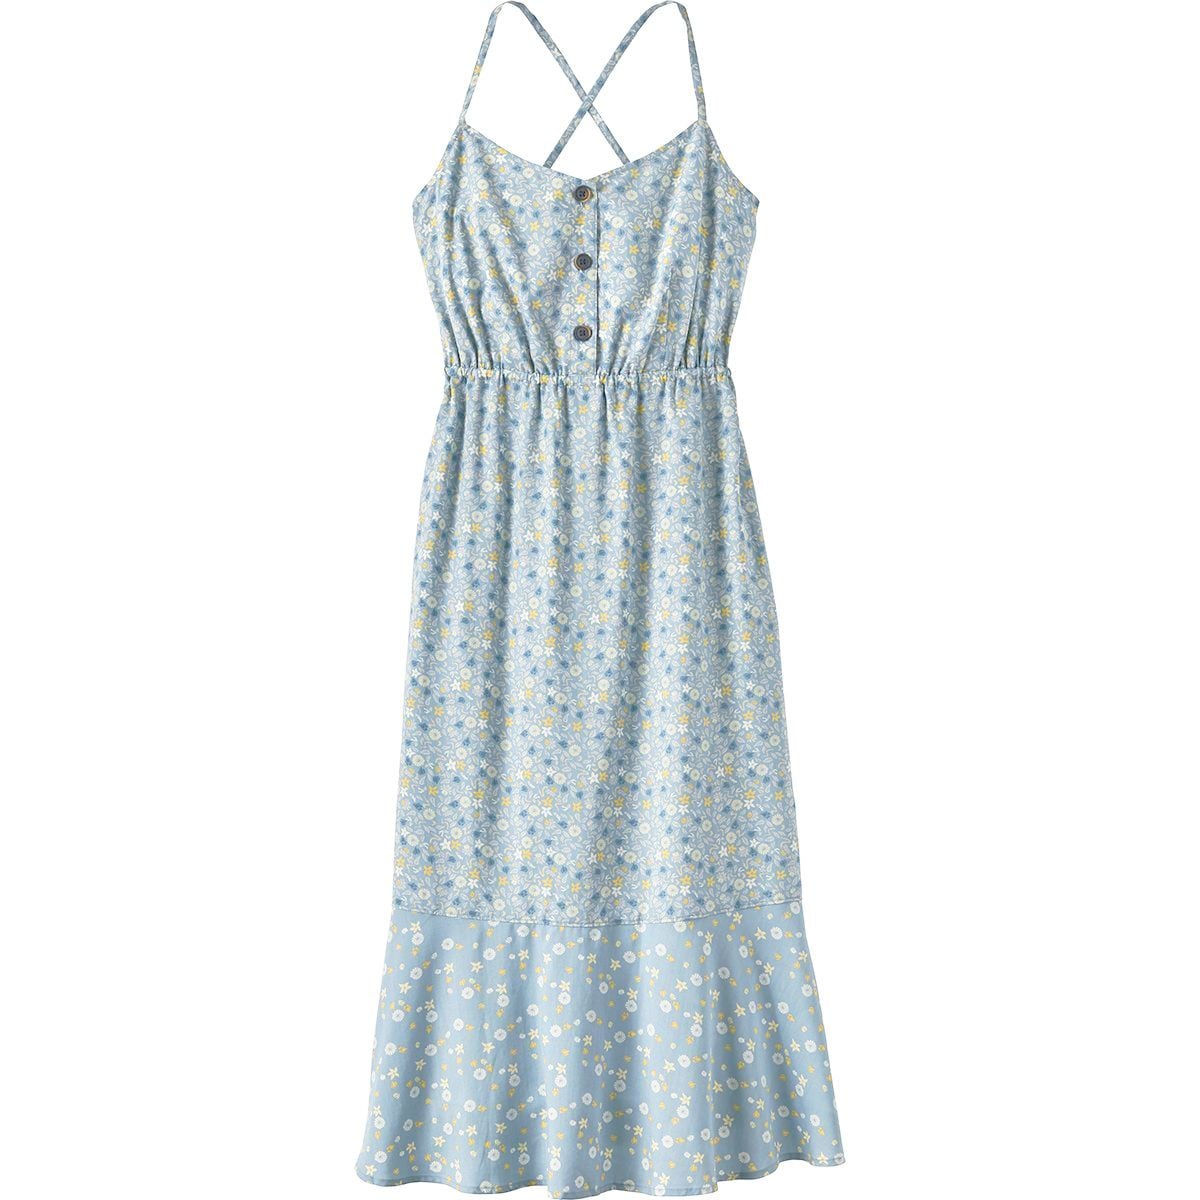 Patagonia Lost Wildflower Dress - Women's | Backcountry.com